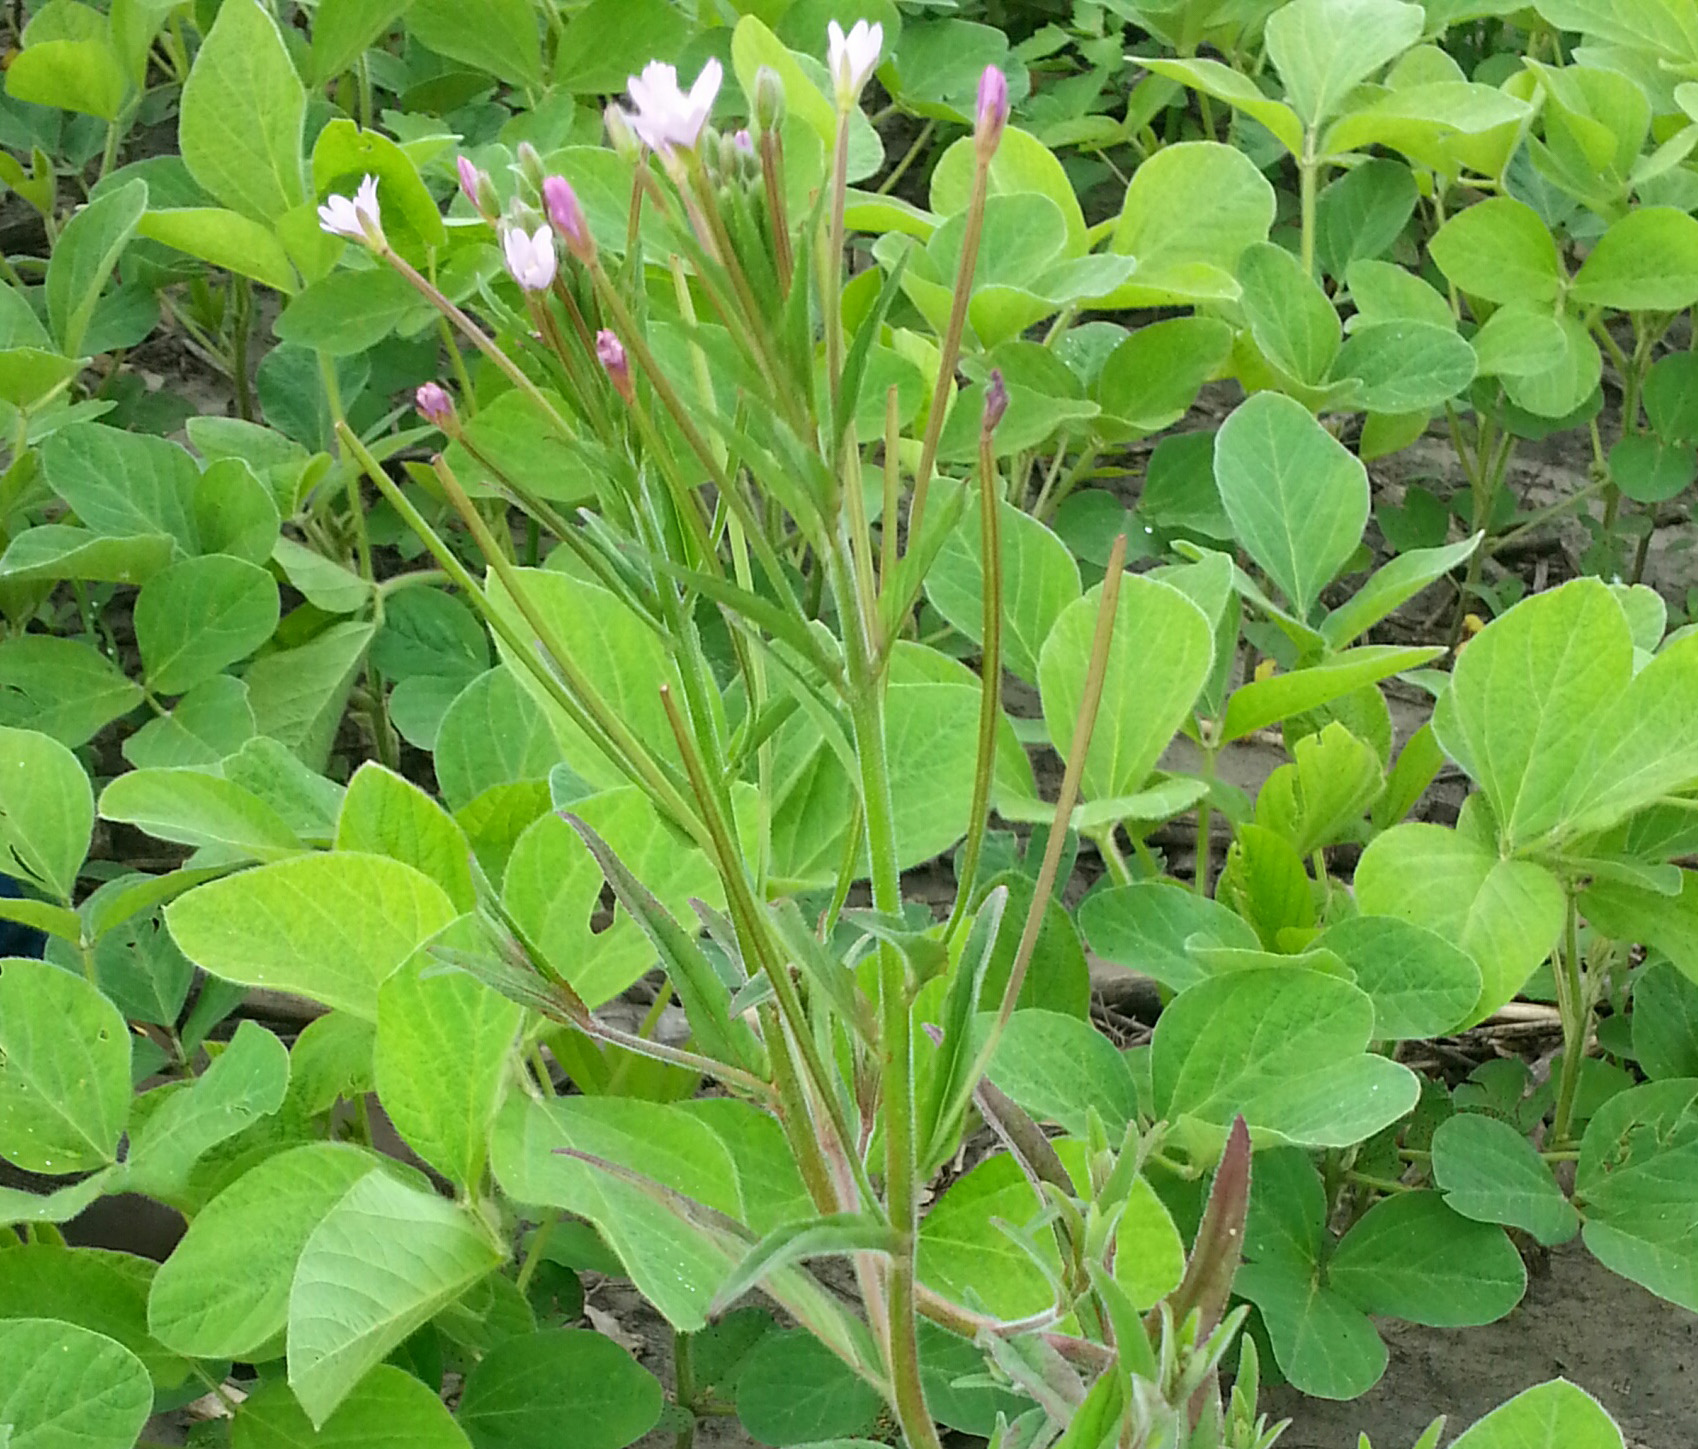 A flowering plant with pinkish-purple petals in early July in a soybean field